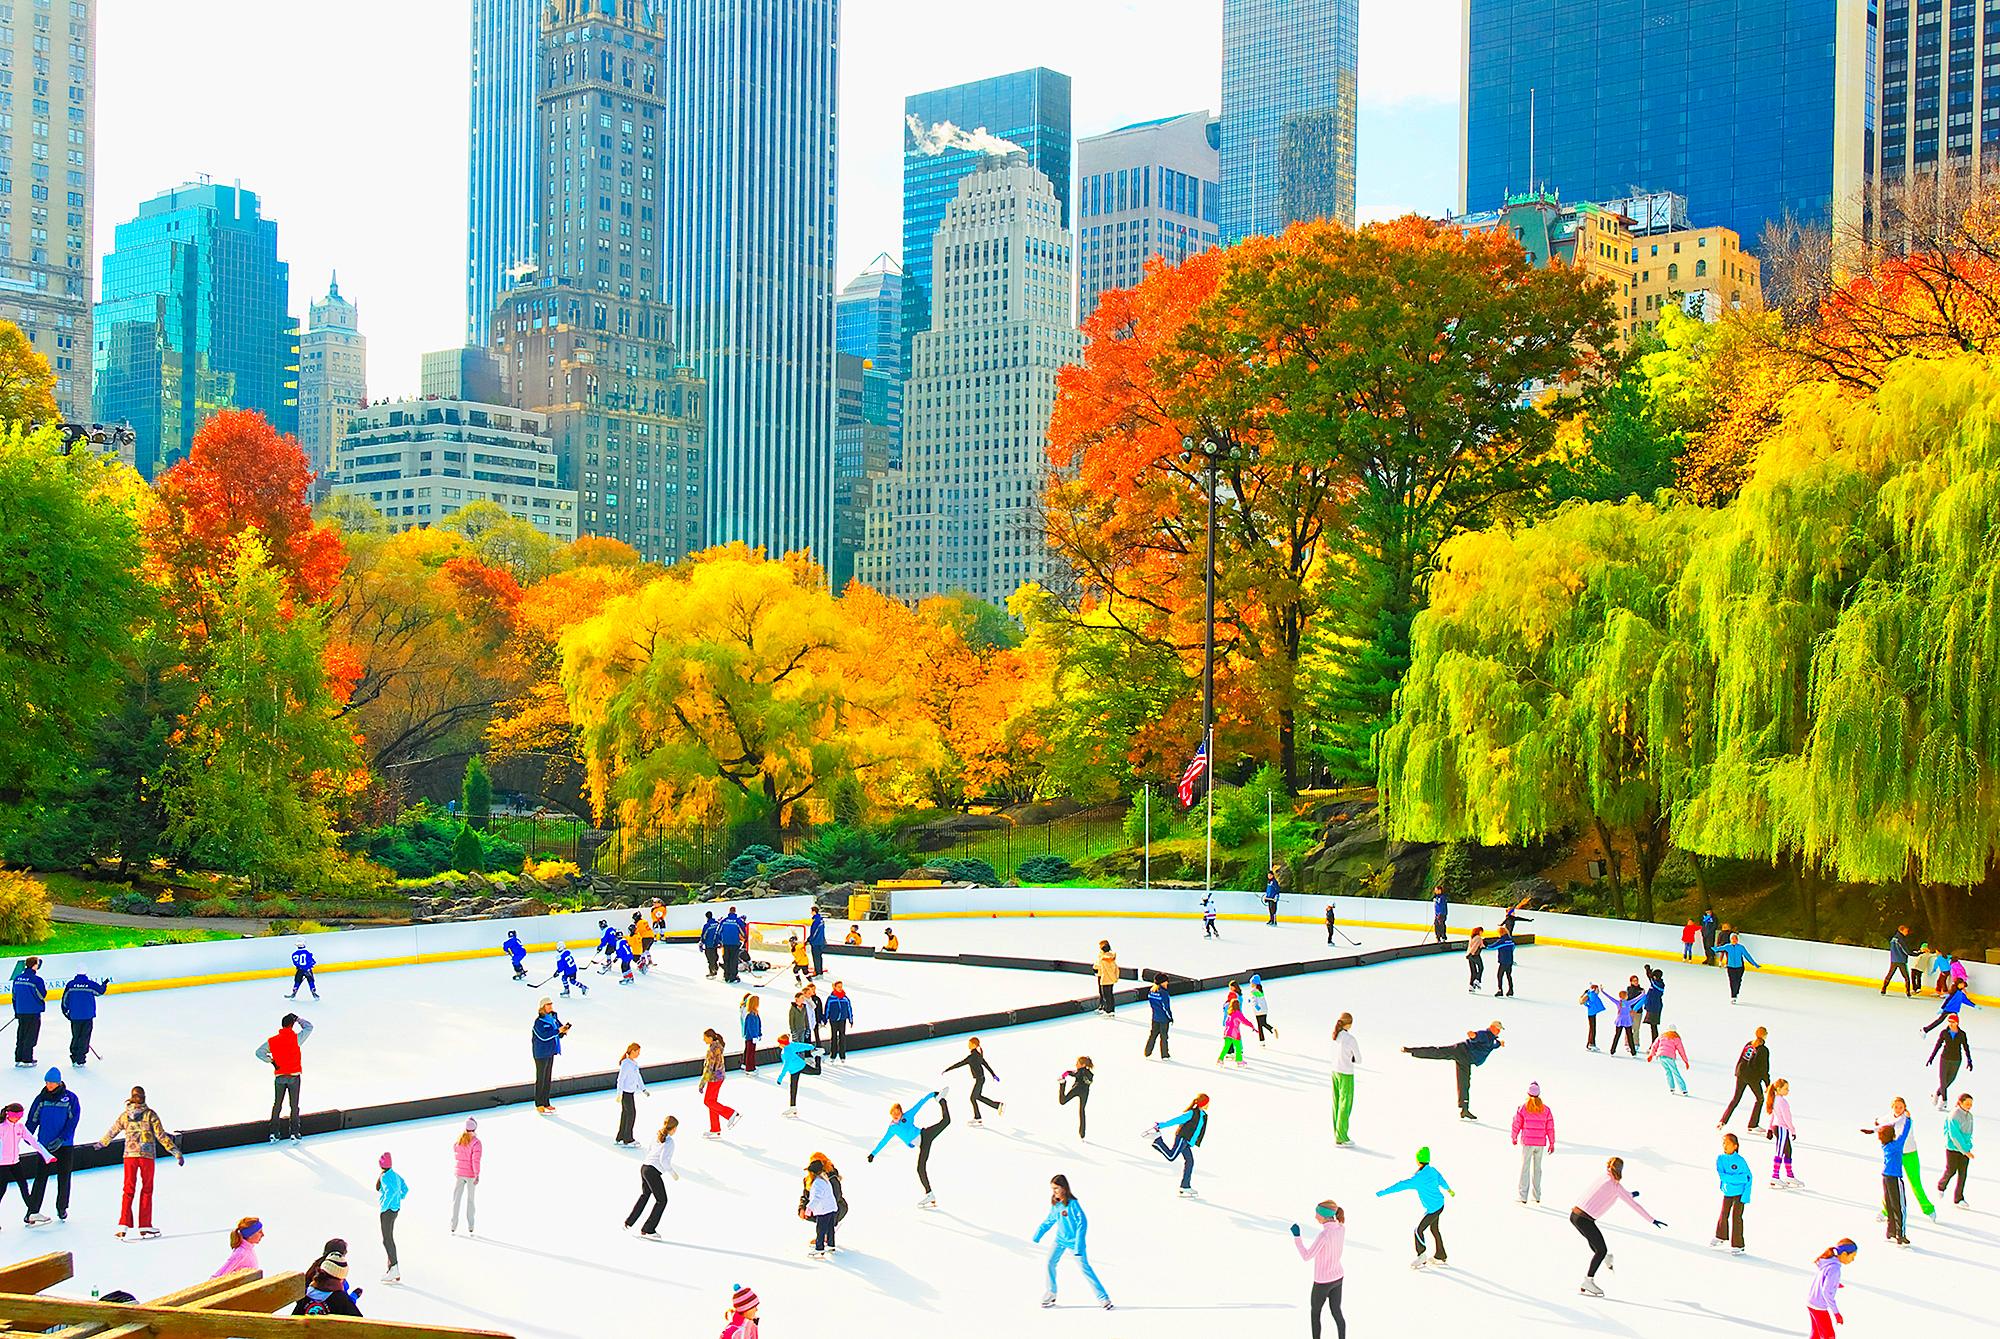 Ice Skaters in Central Park Rink  Panoramic view of the Skyline Autumn Colors